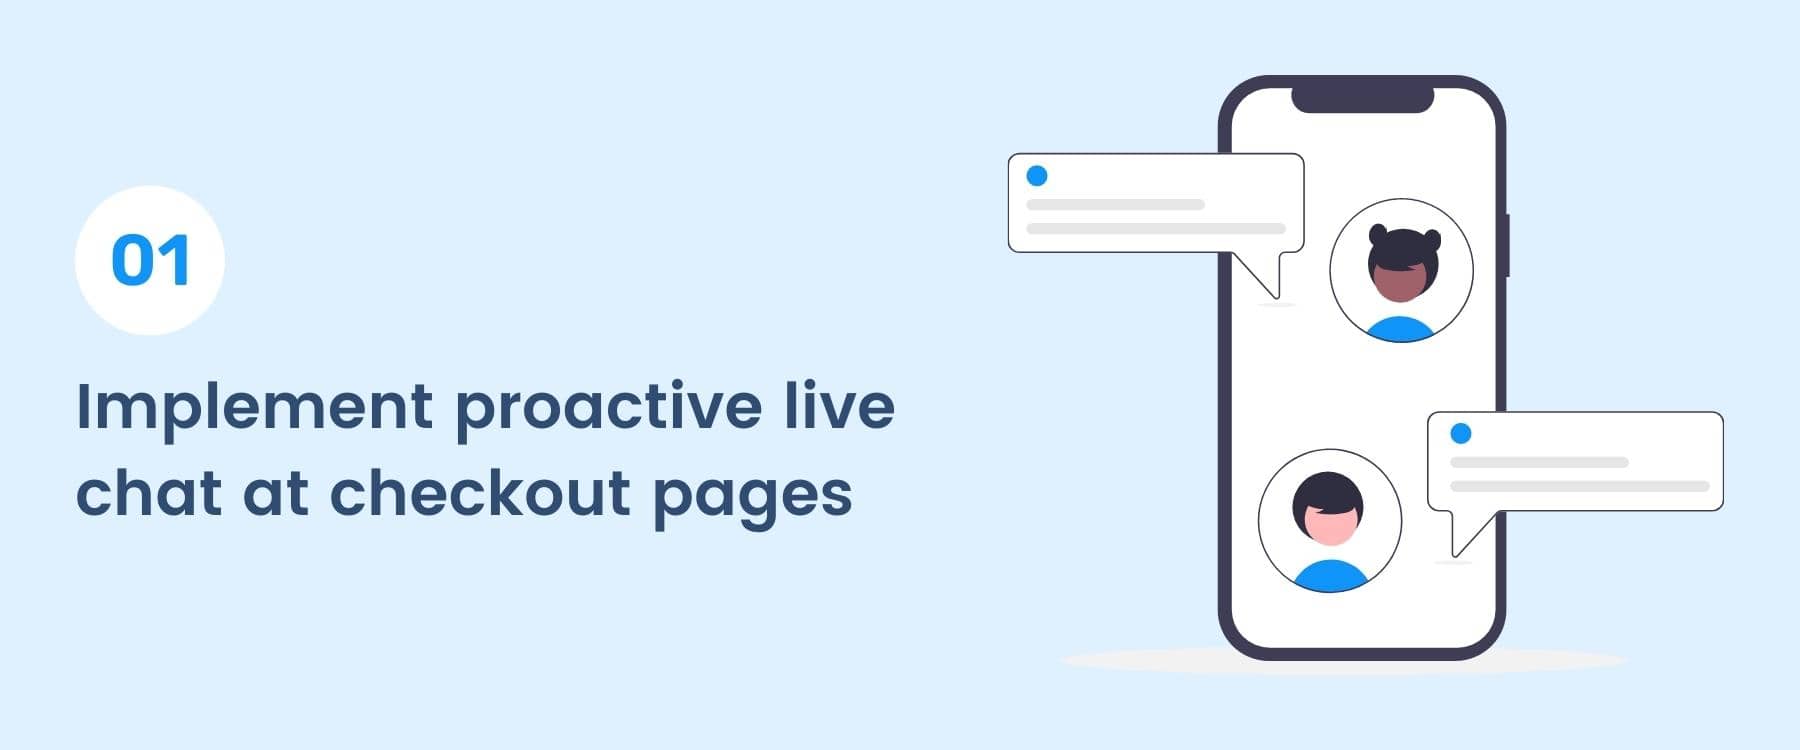 Implement proactive live chat at checkout pages